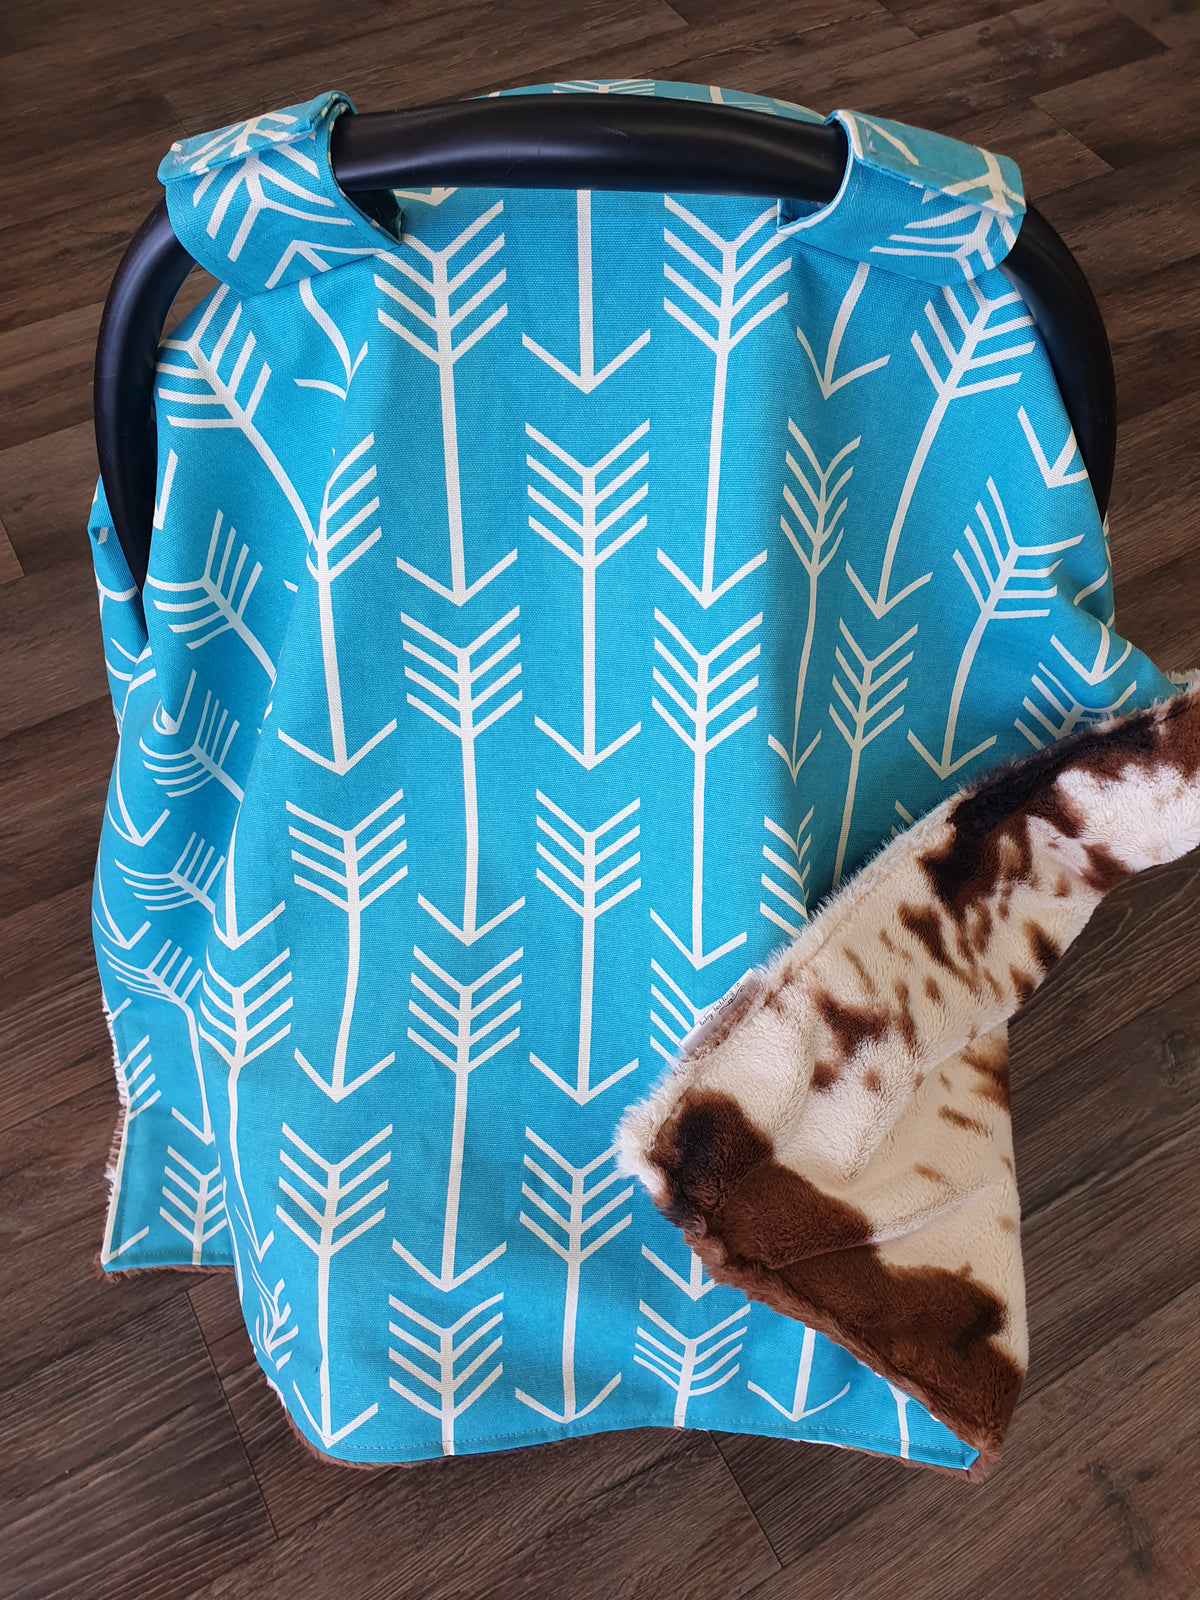 Boy Crib Bedding - Aztec and Teal Arrow Western Baby Bedding &amp; Nursery Collection - DBC Baby Bedding Co 